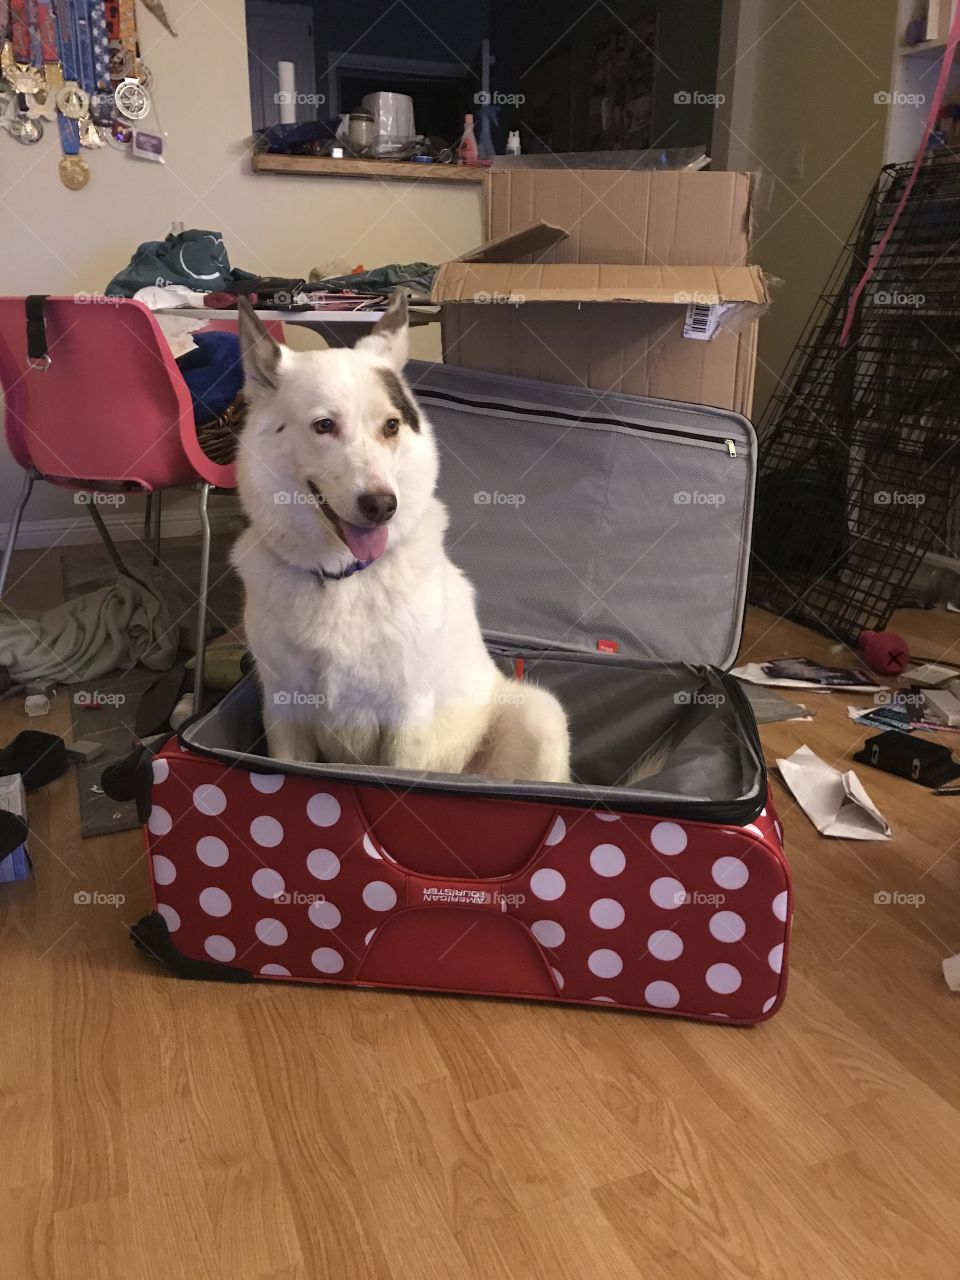 Big dog in a suitcase 